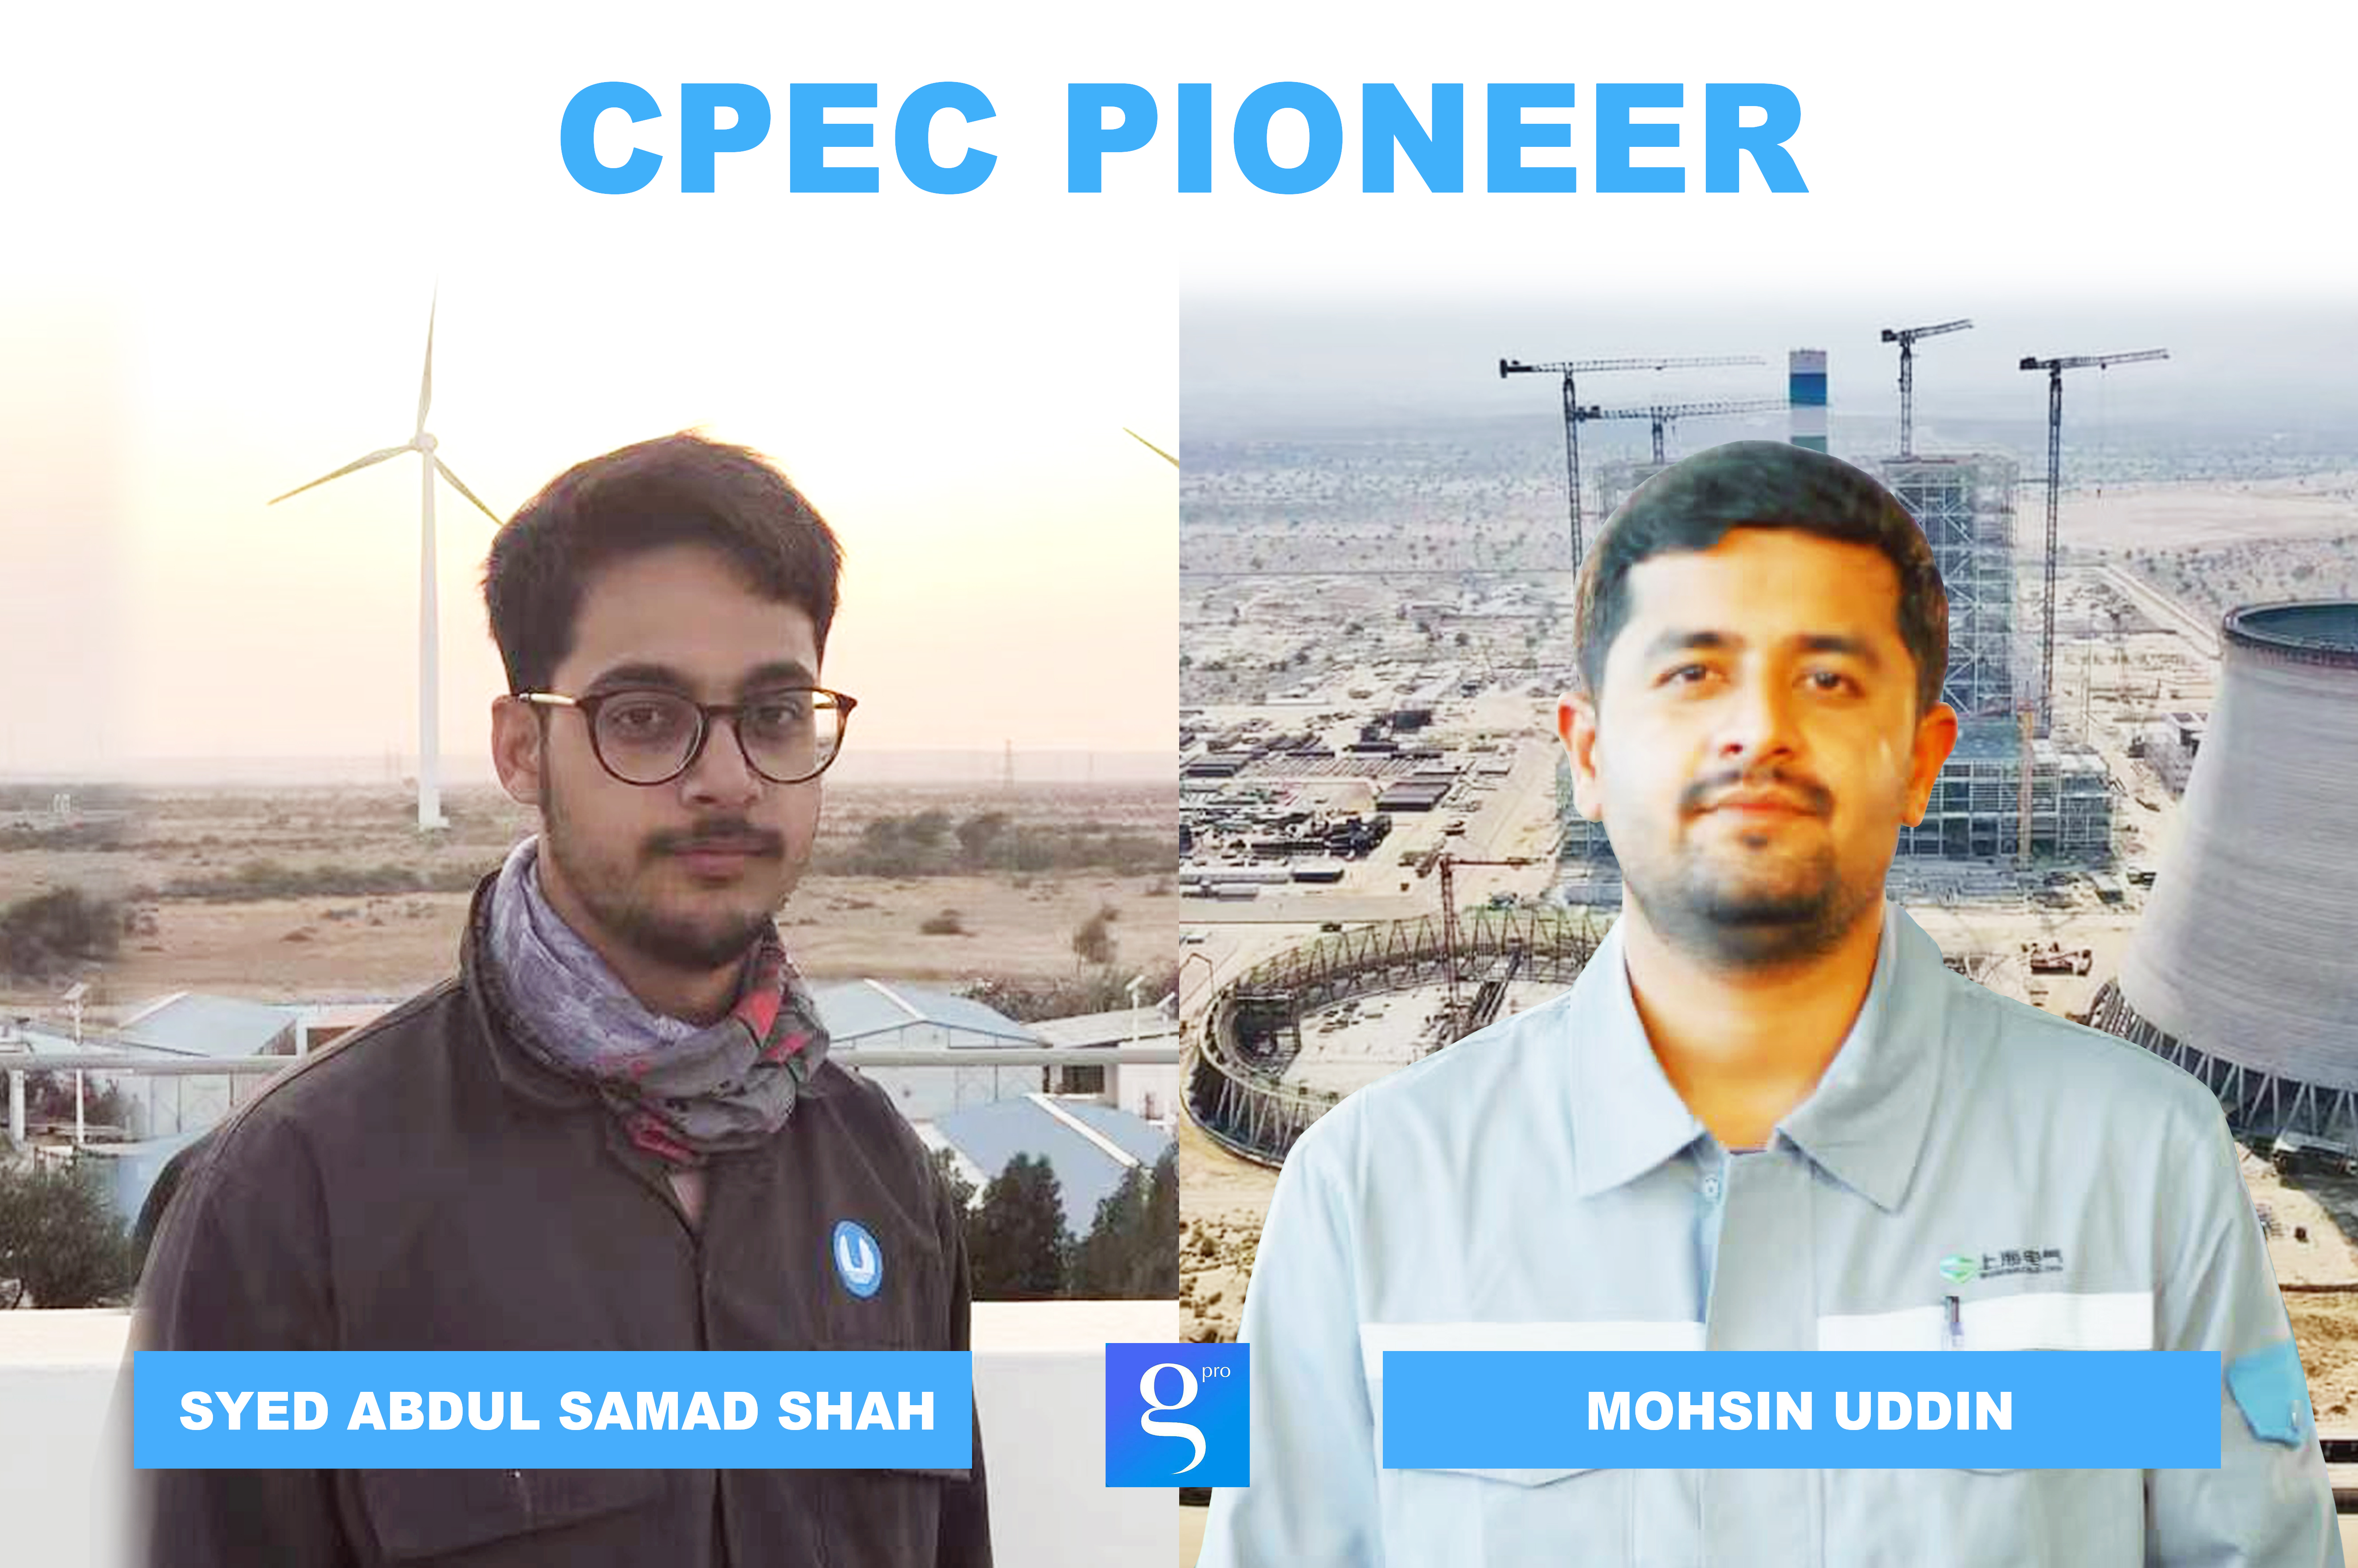 Young elites with higher education taking part in CPEC: stories of CPEC Pioneer